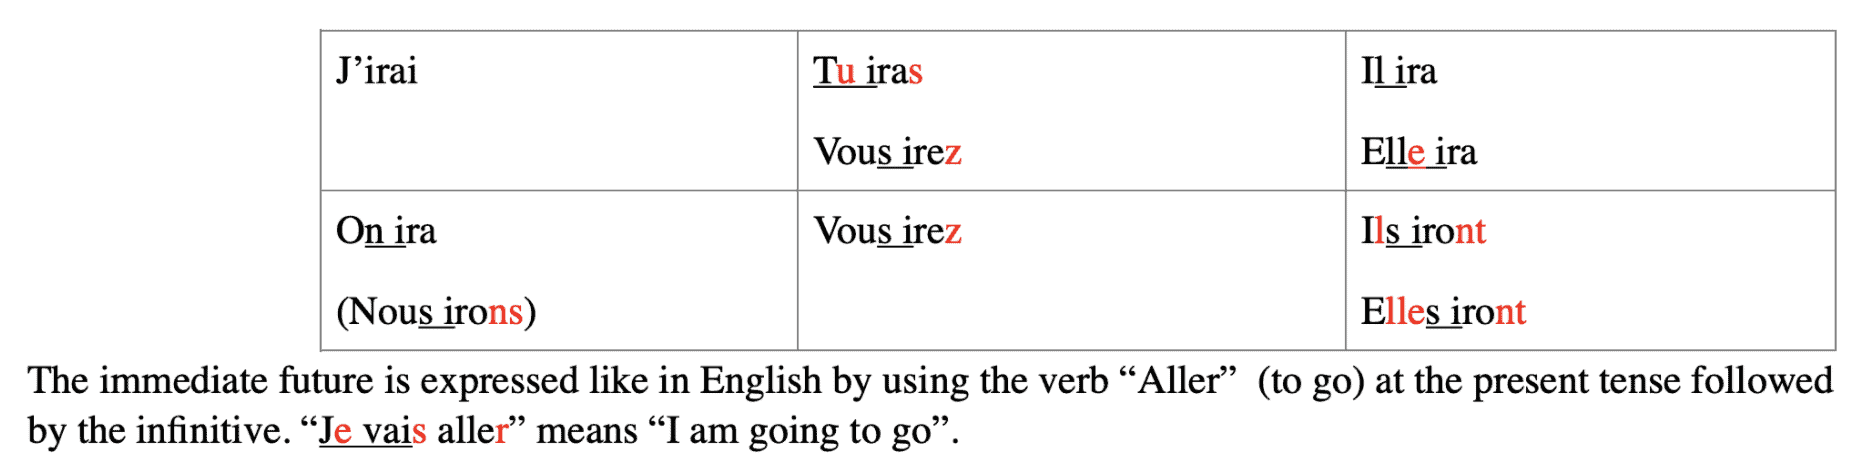 french-conjugation-worksheets-41-life-changing-weeks-week5-day5